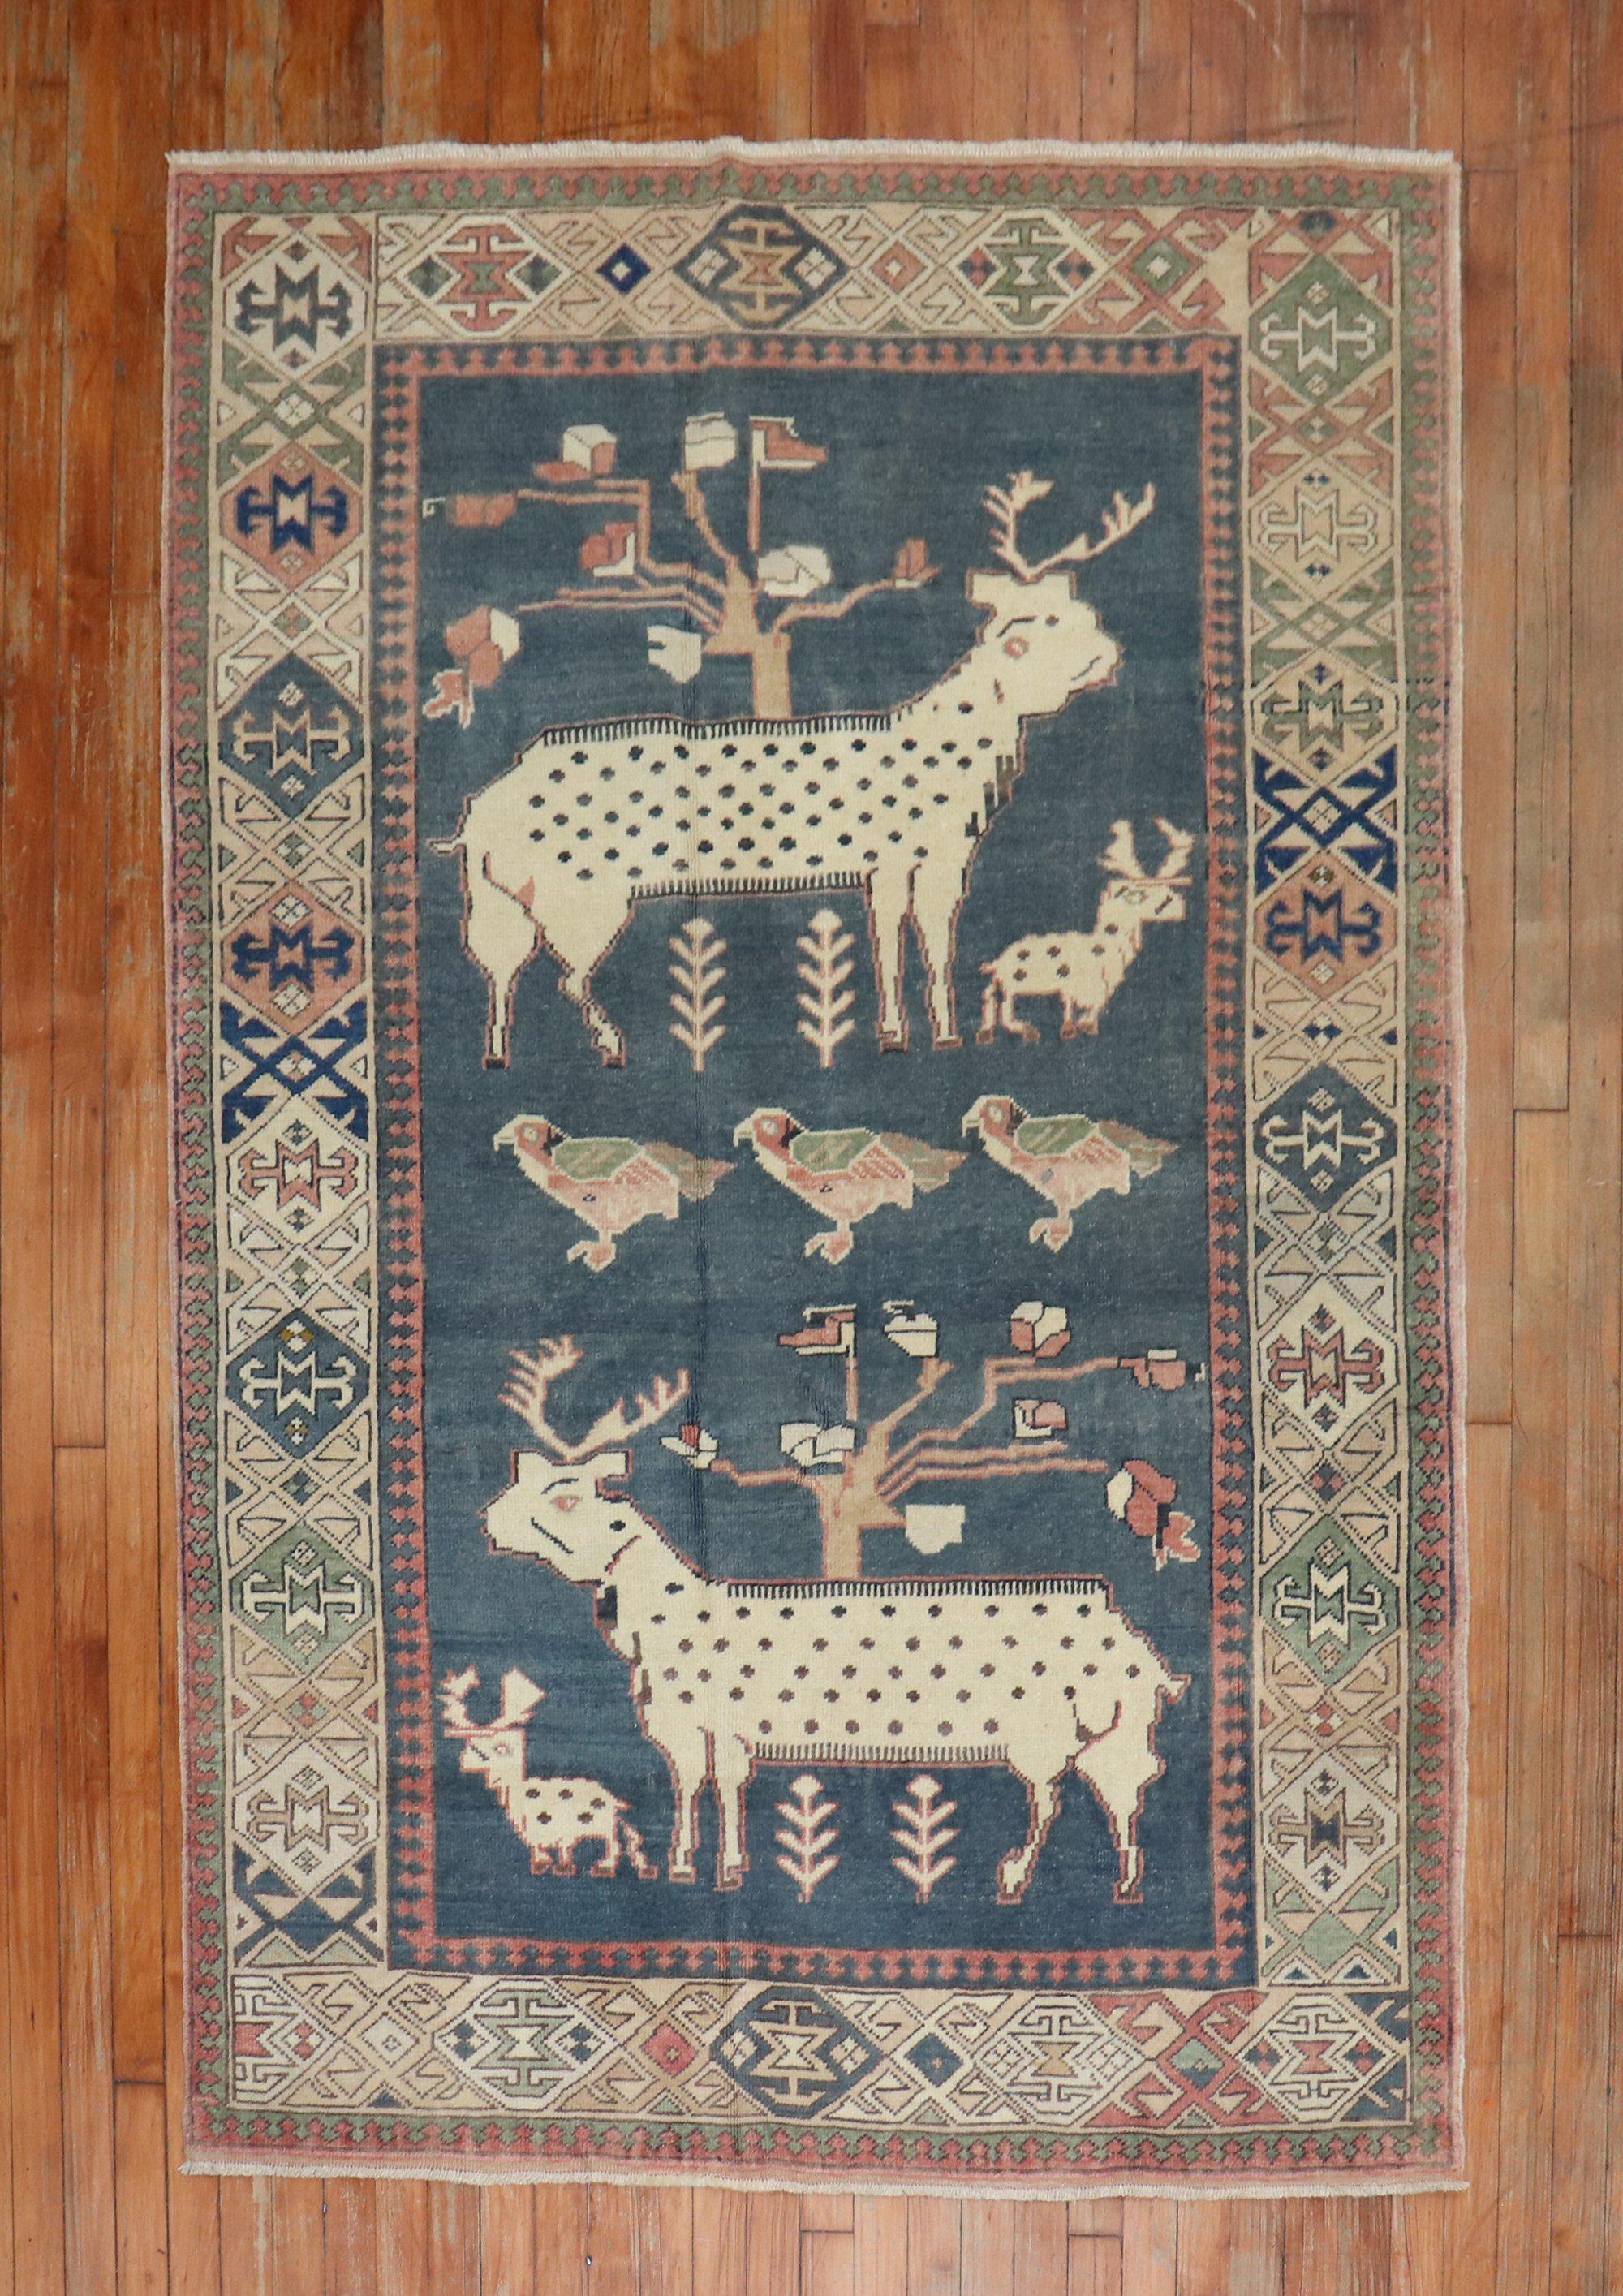 20th-century Turkish rug depicting 2 large goats, 2 small goats 3 pigeons on a charcoal ground

Measures: 4'7'' x 6'9''.